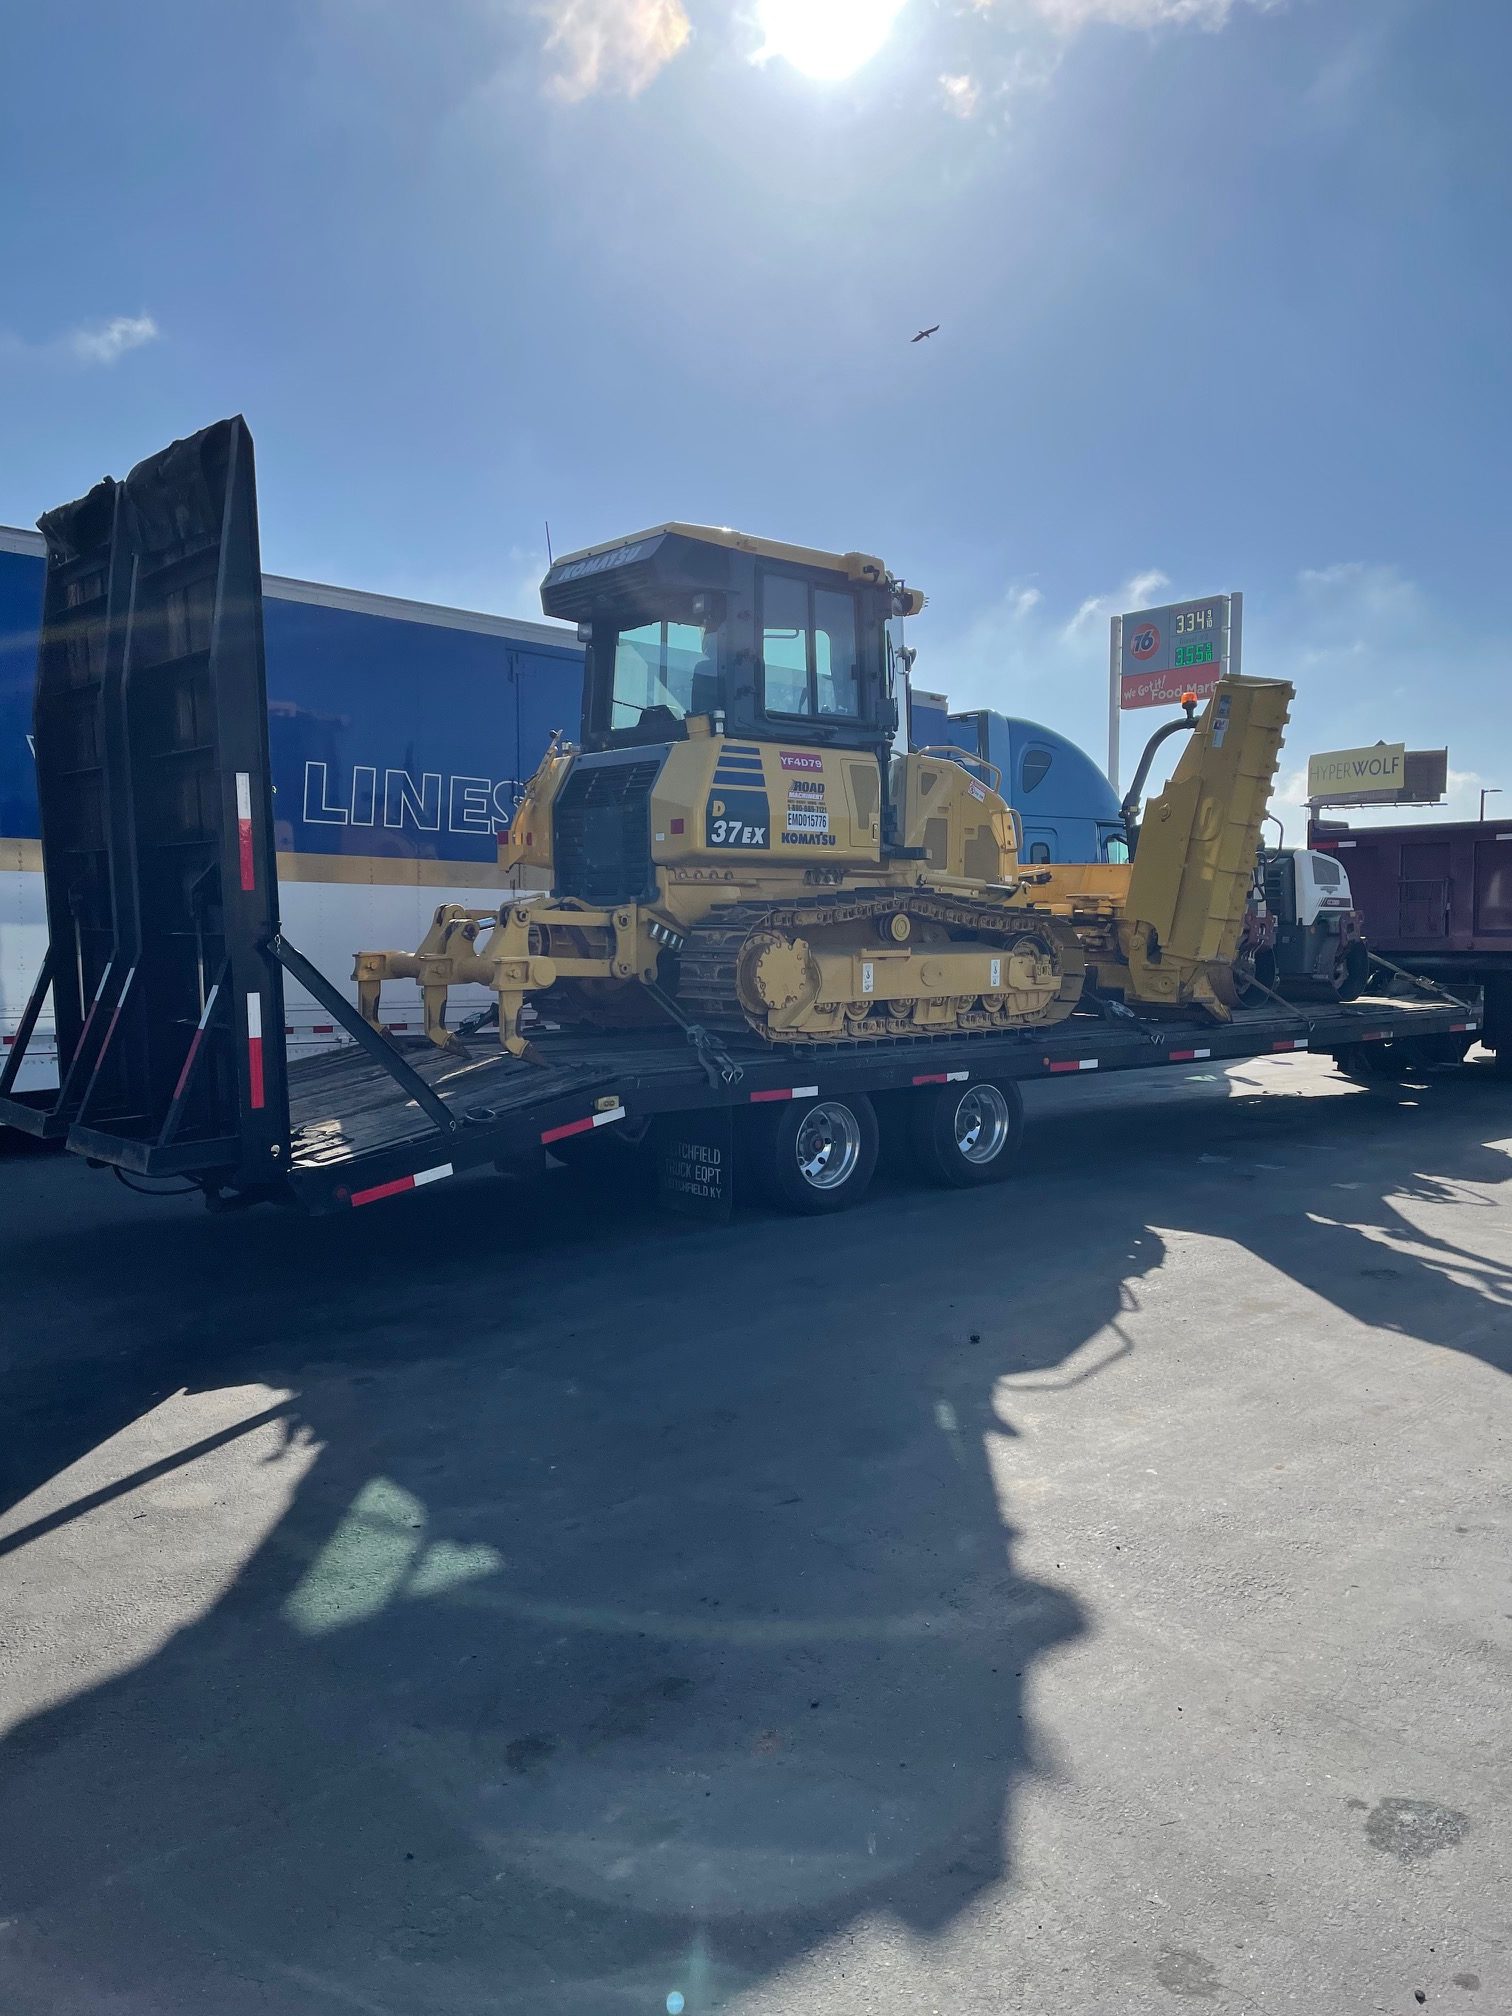 A yellow bulldozer is loaded on a black trailer